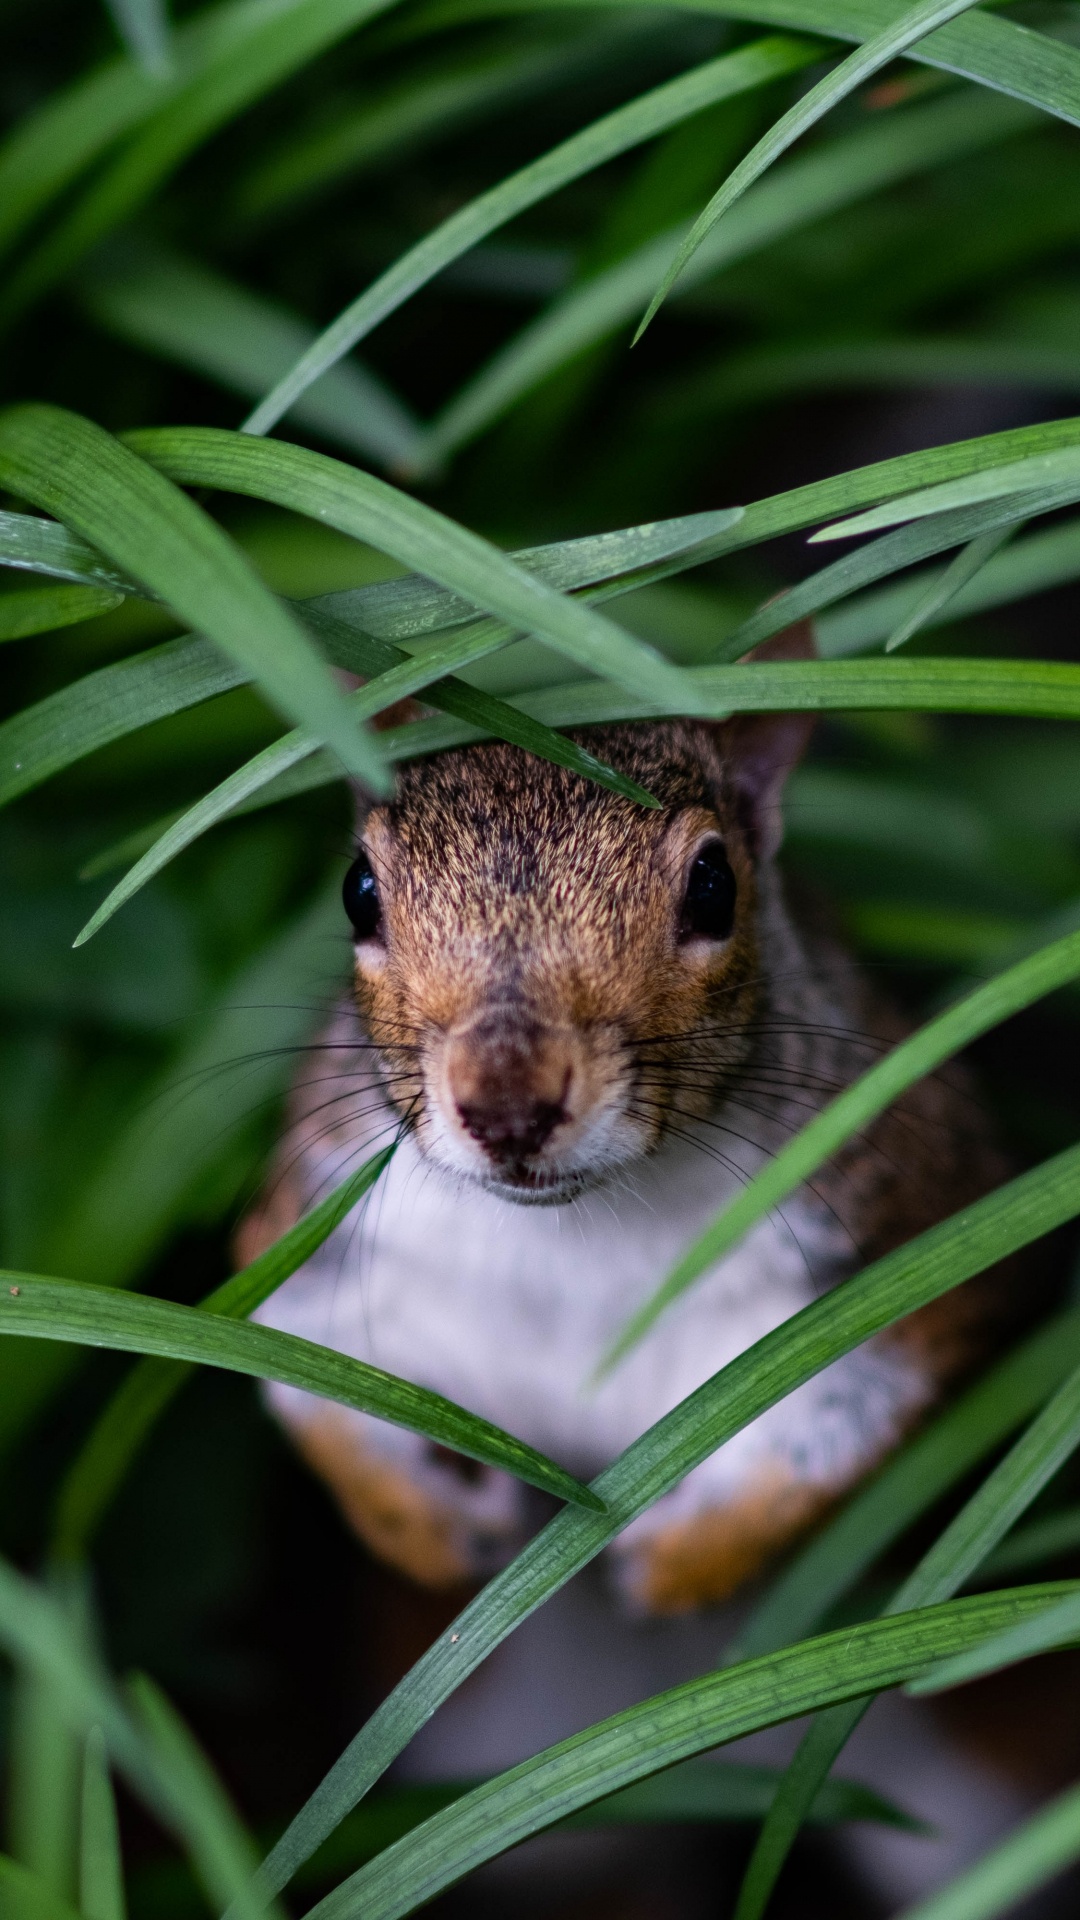 Brown and White Squirrel on Green Grass During Daytime. Wallpaper in 1080x1920 Resolution